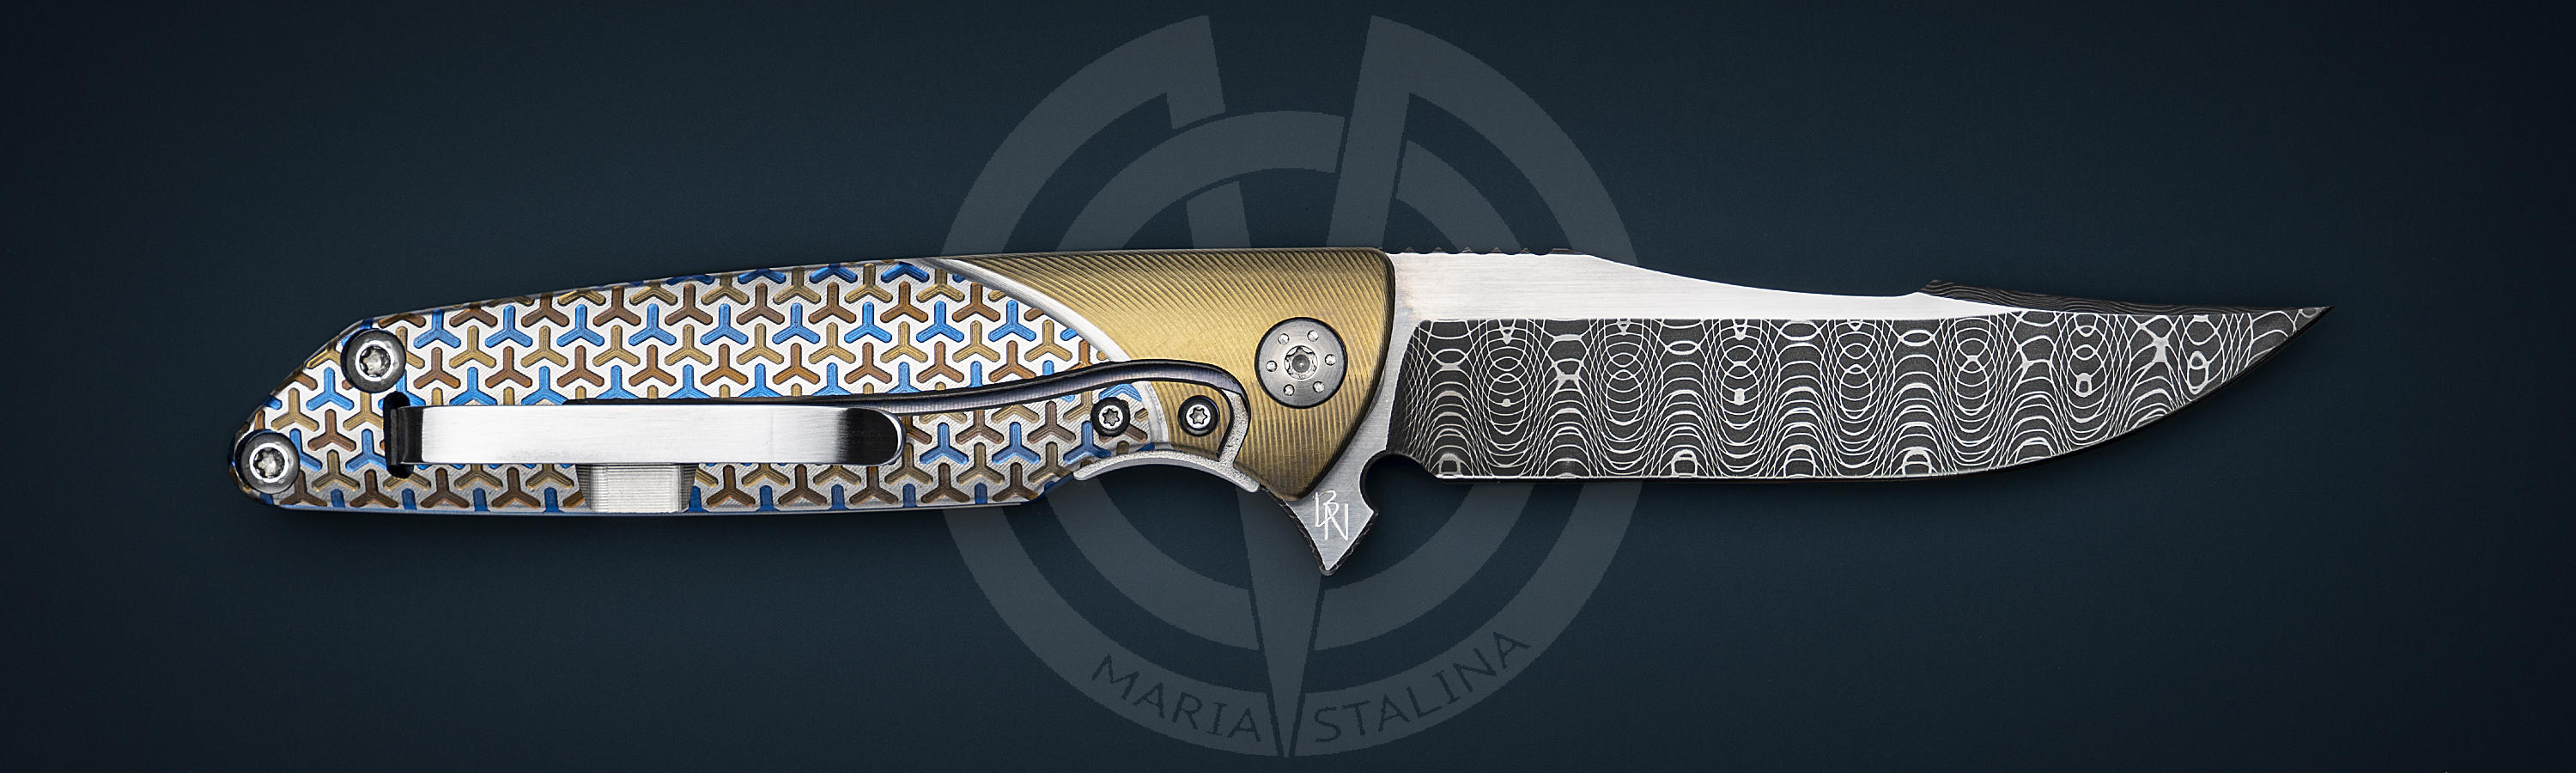 Blade material	Rob Thomas Stainless Spirograph Damascus knife Typhoon Blue